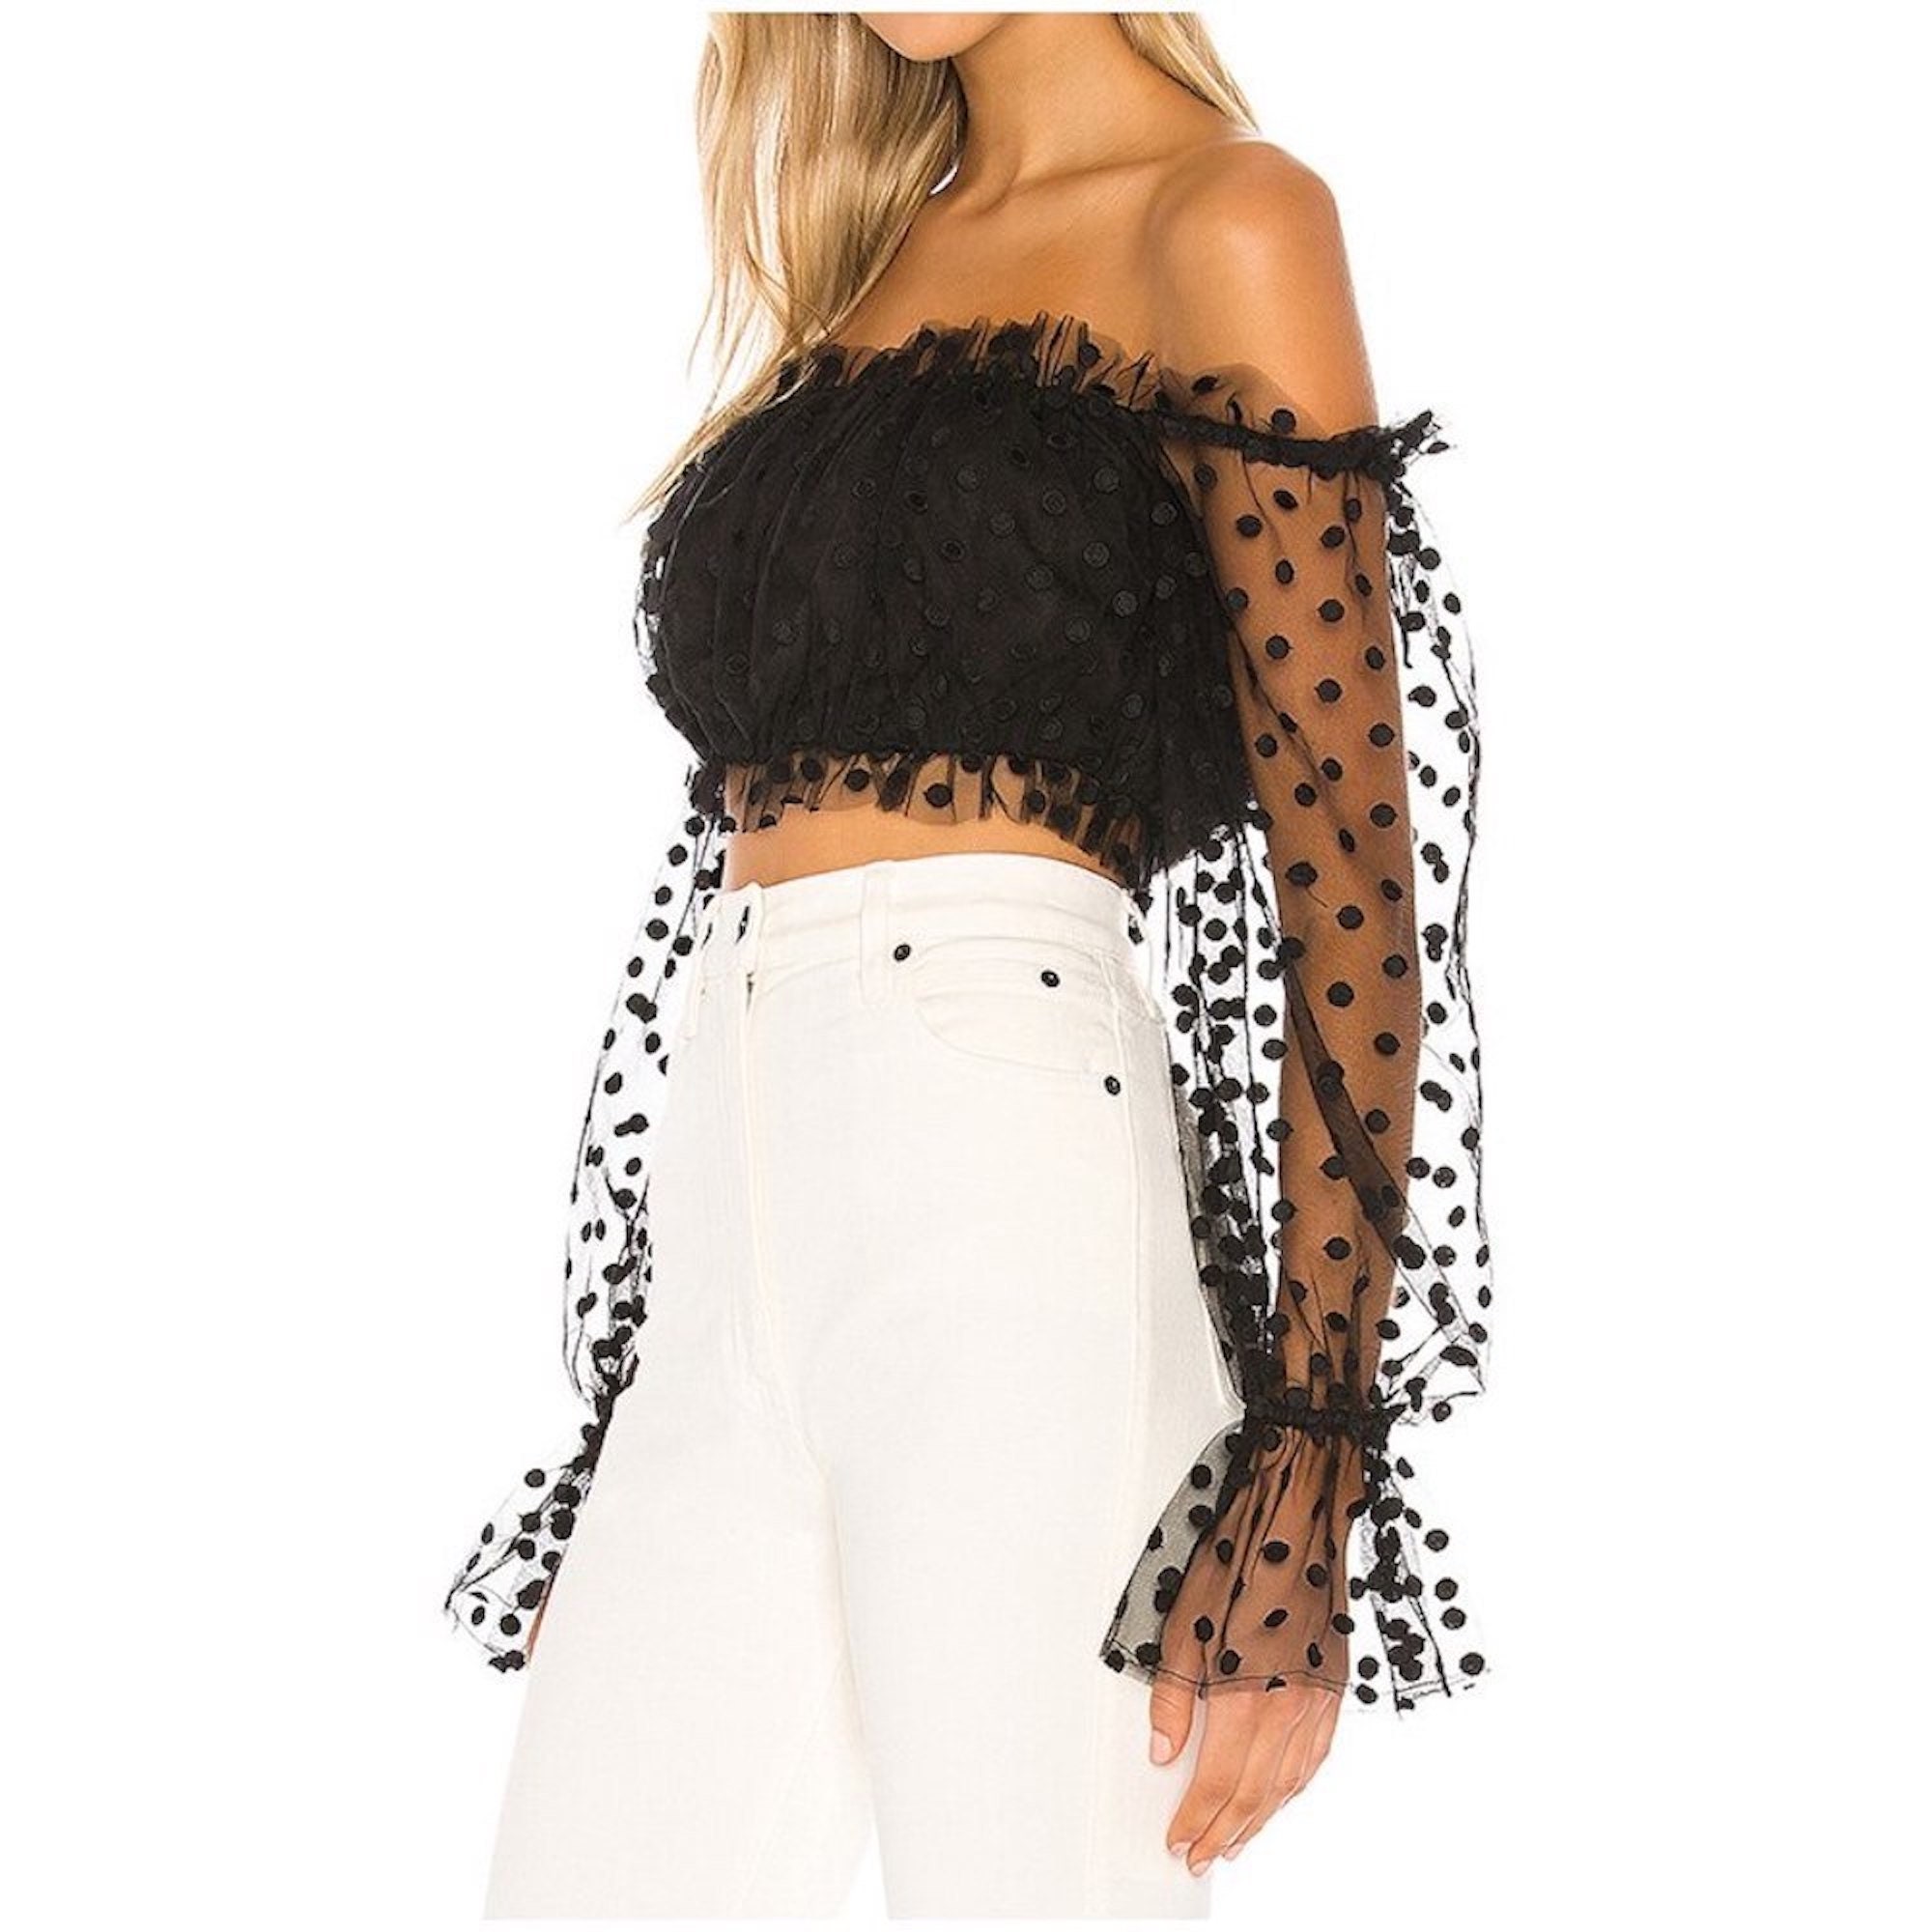 Black Sheer Mesh Embroidery Crop Top Off the Shoulder Long Sleeve Top Casual